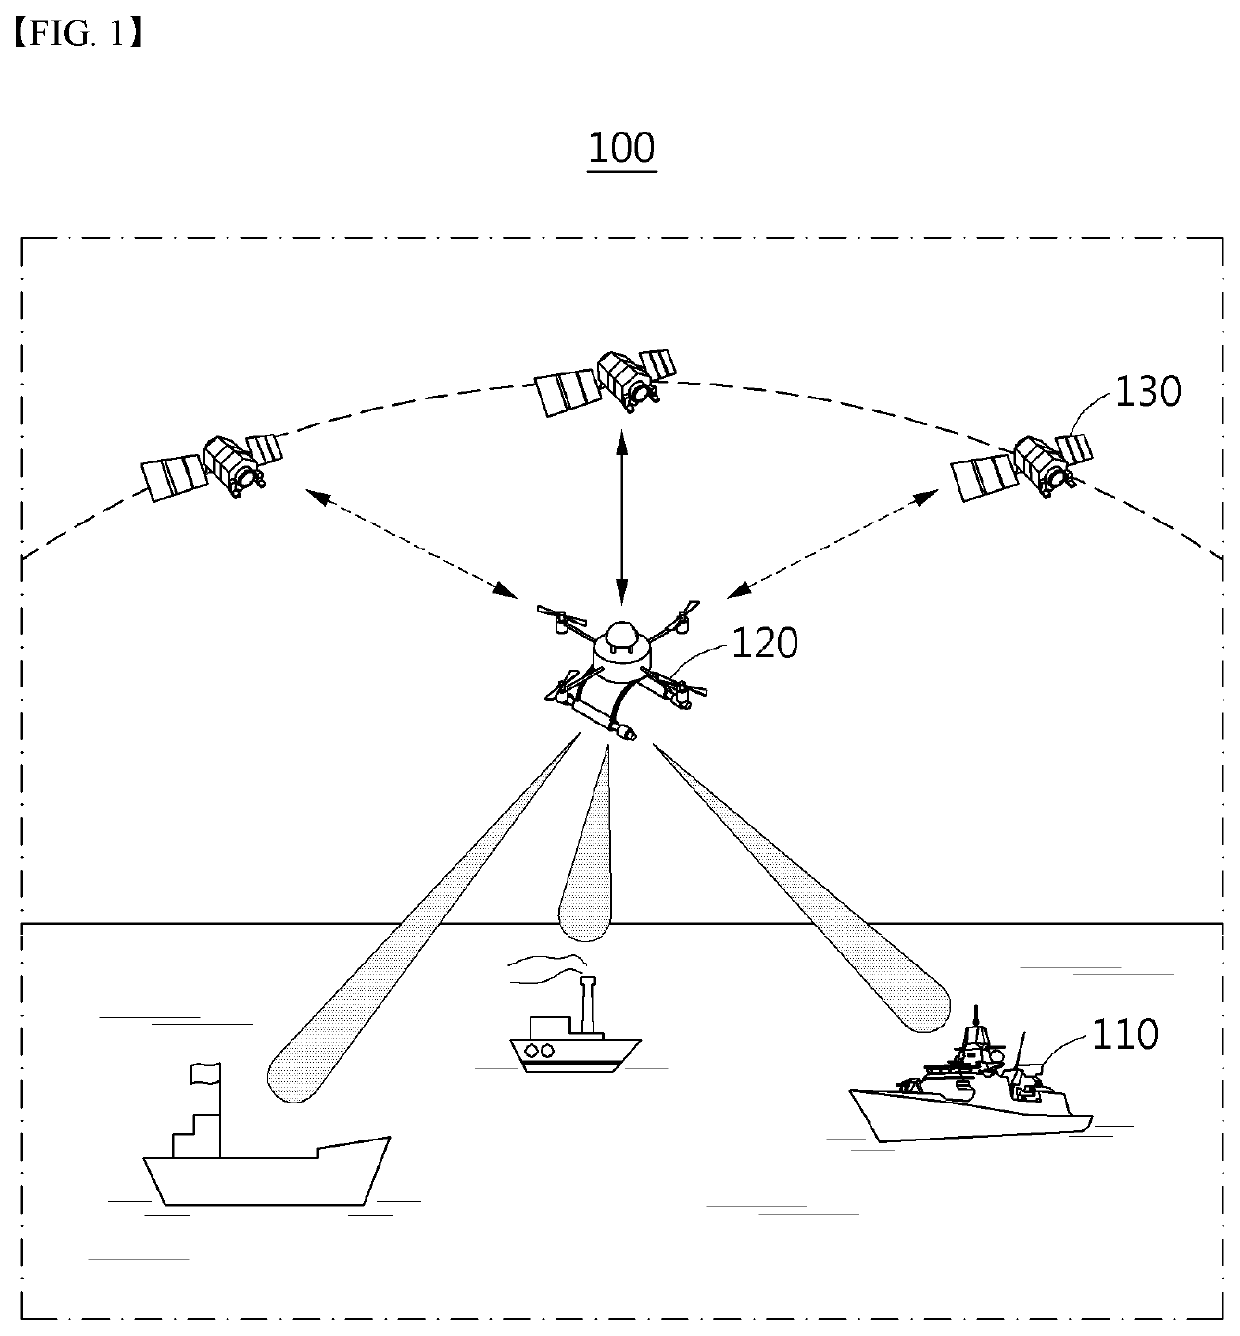 Maritime communication system based on low earth orbit satellite and unmanned aerial vehicle